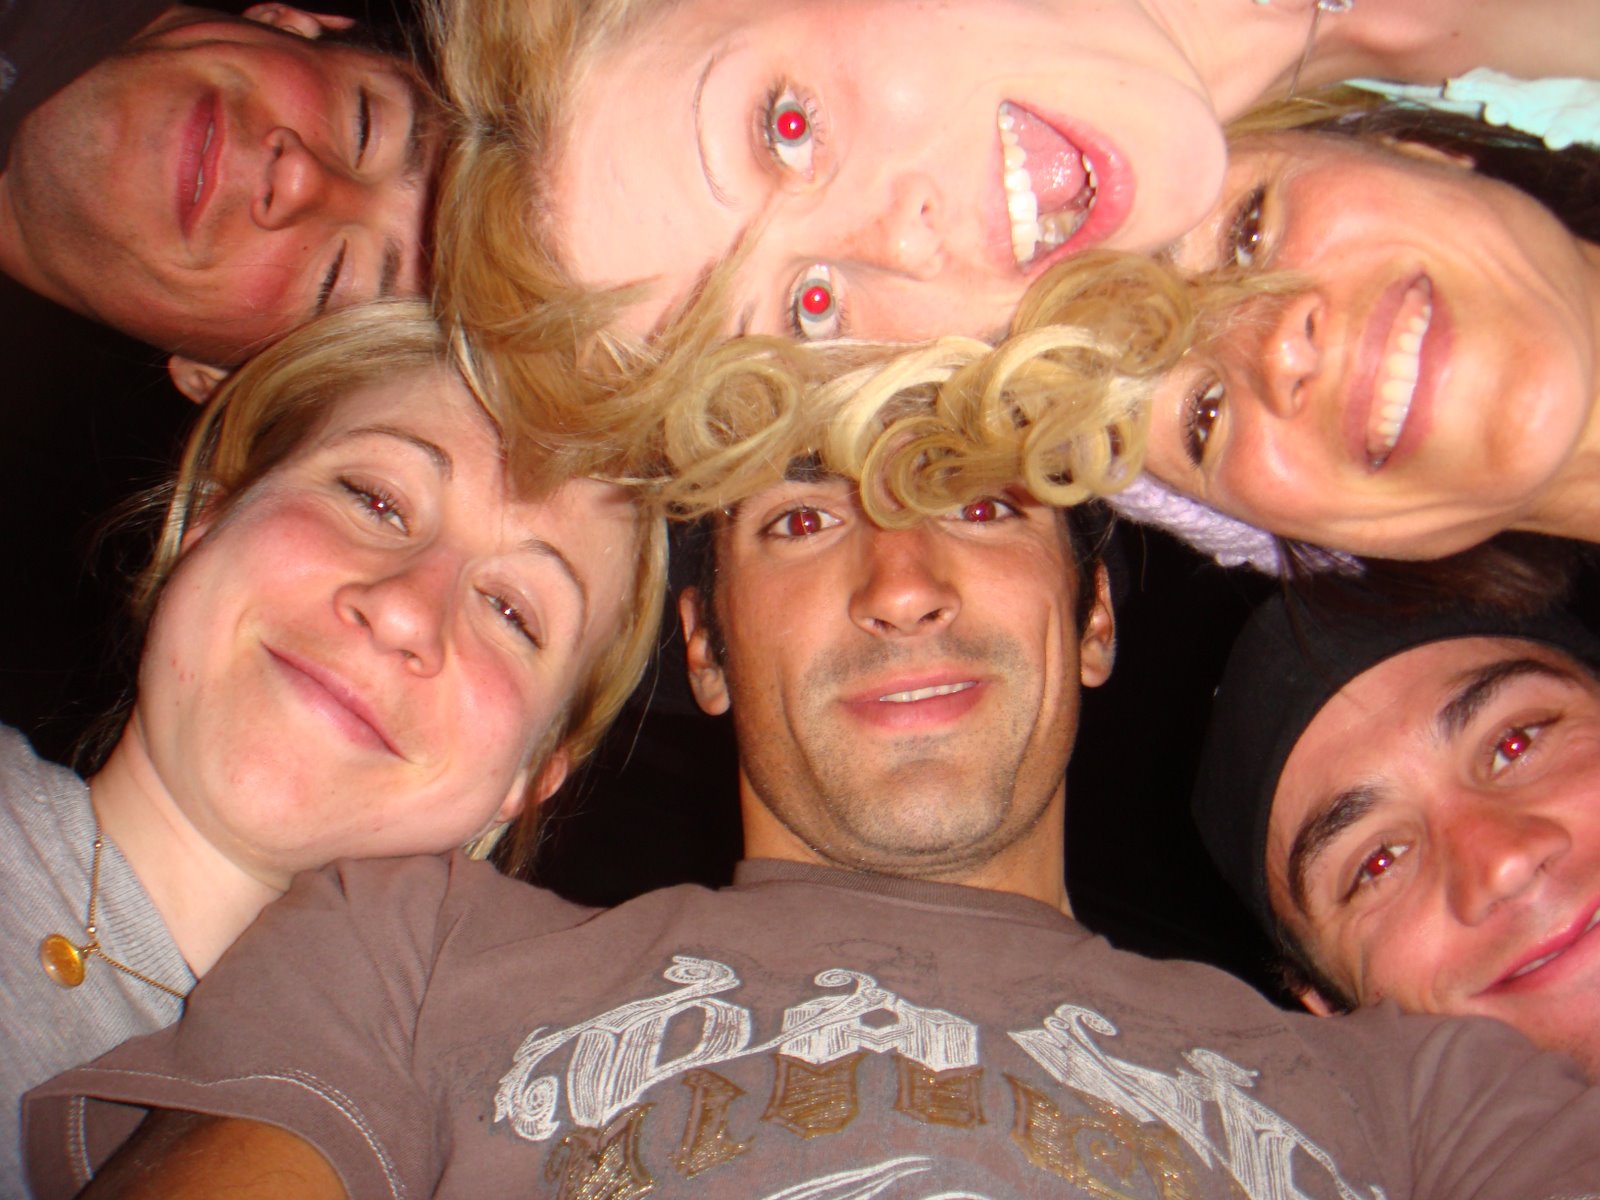 [All+heads+in,+Me,+Iona,+Ale,+Seba,+Andrea,+and+Andy+having+a+good+time+in+downtown+Fresno+-+CA.JPG]